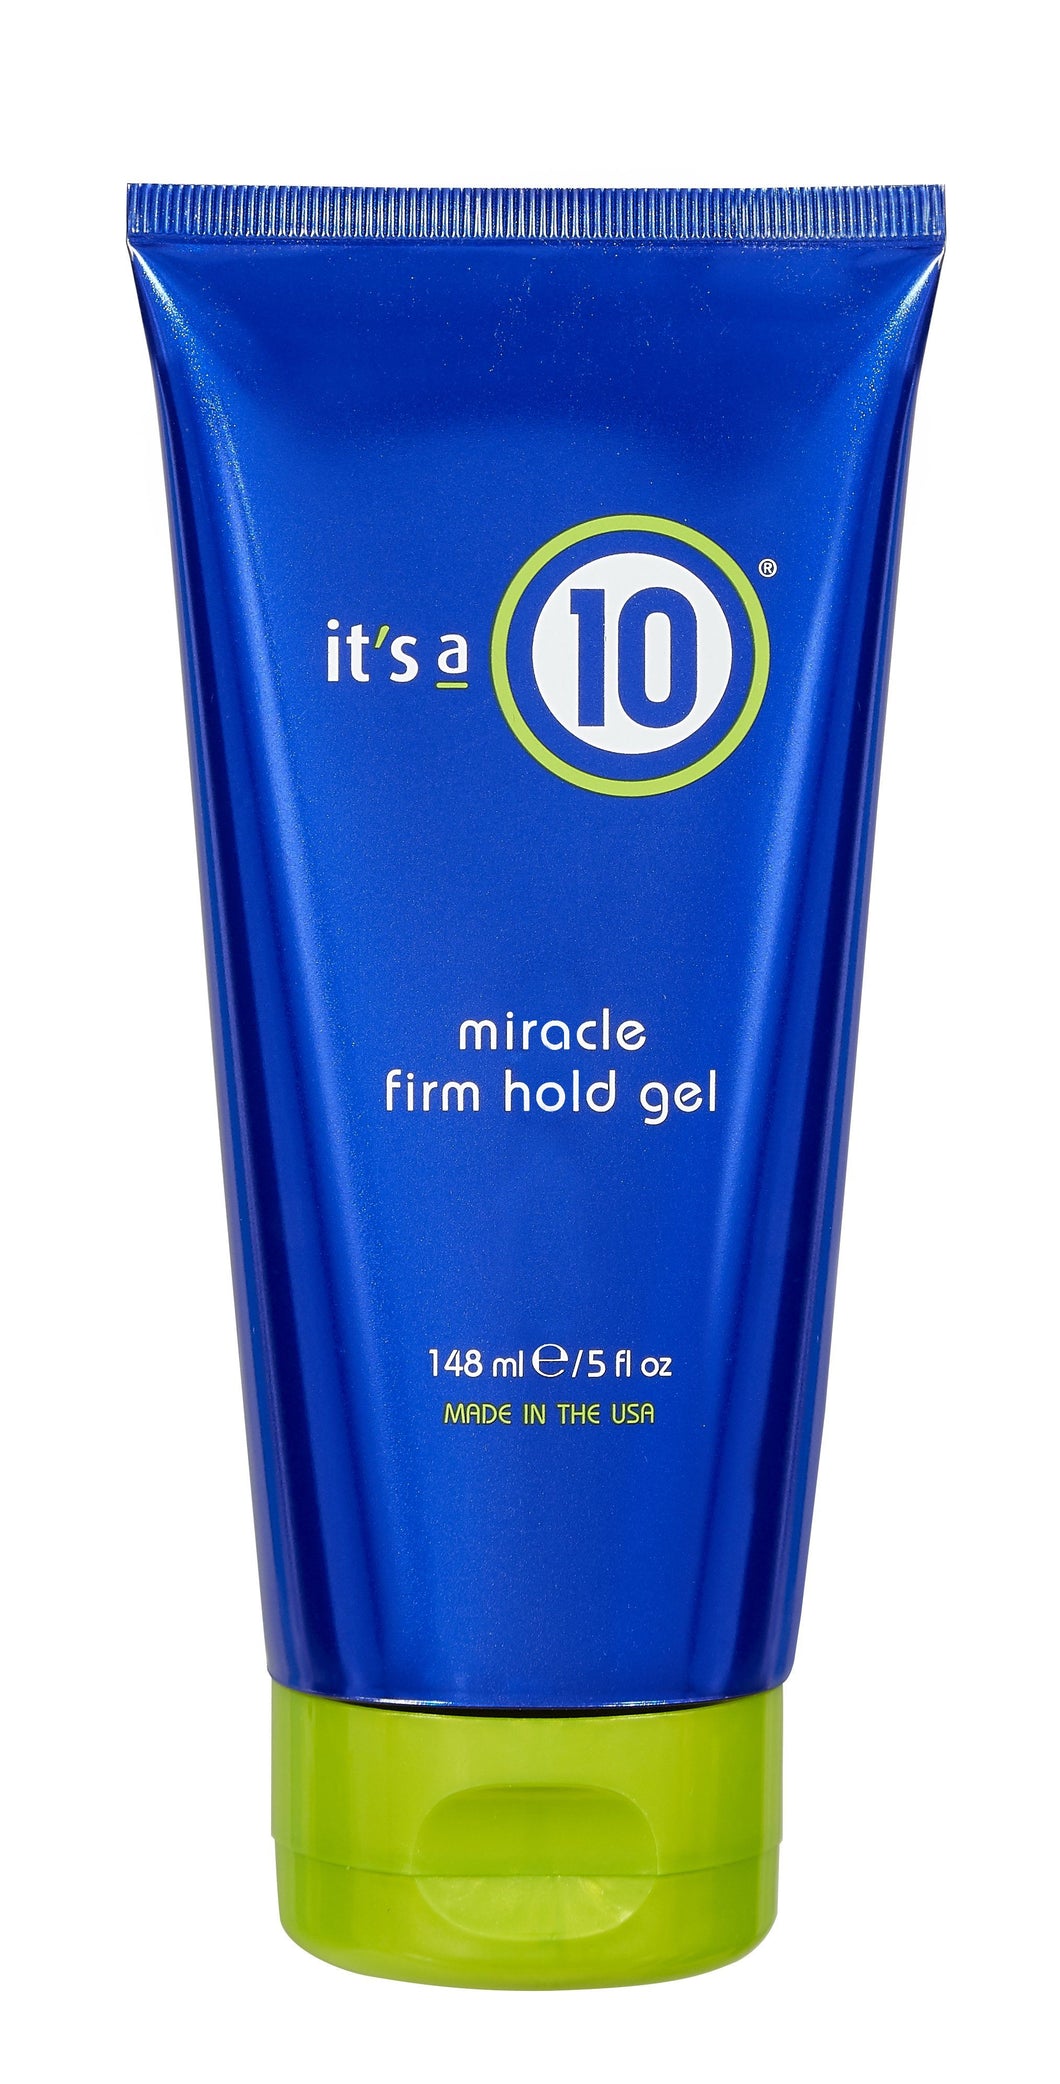 Its a 10 Miracle Firm Hold Gel